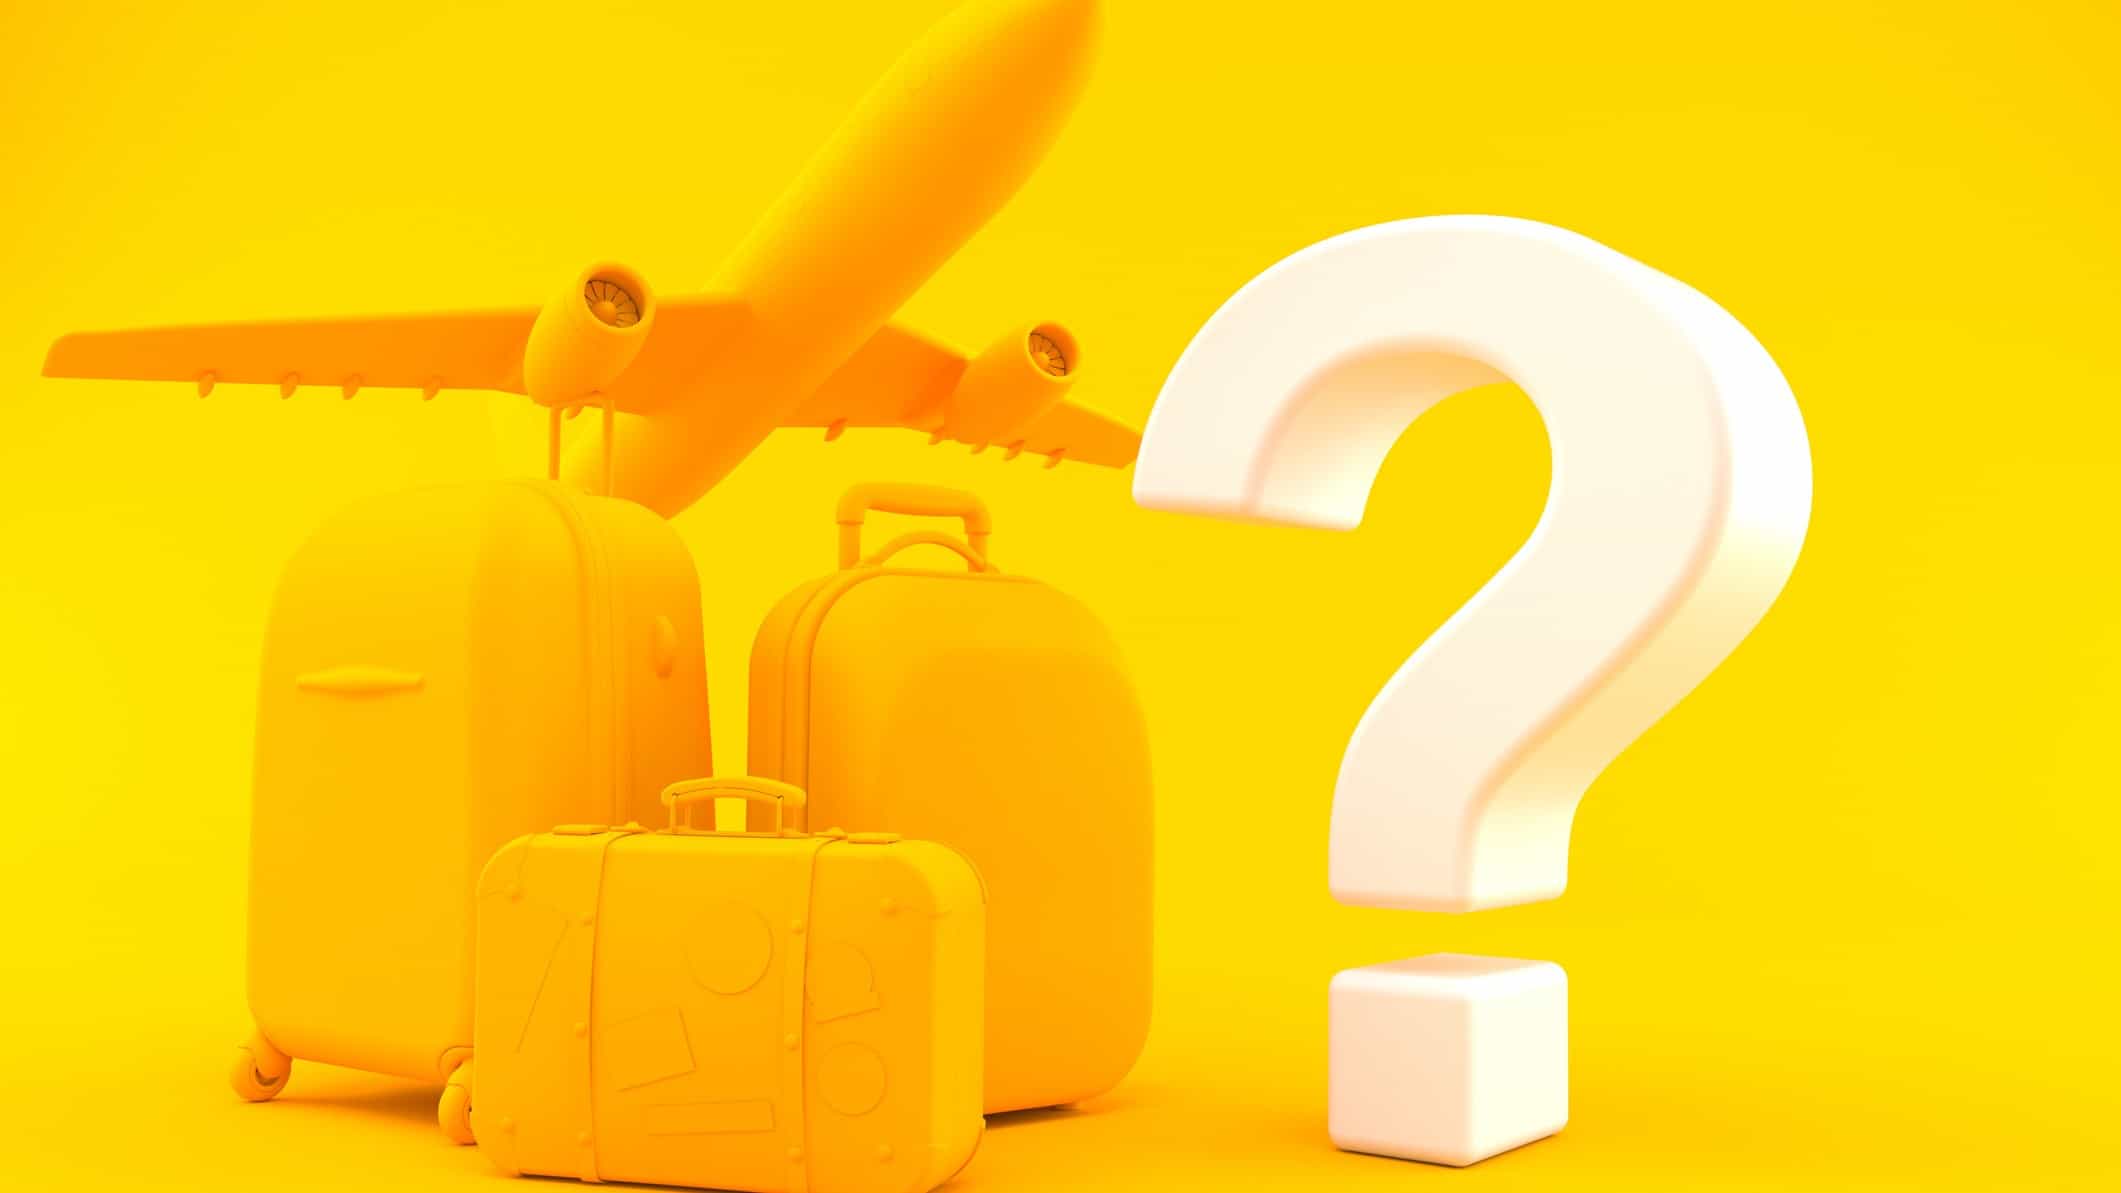 asx airport shares represented by plane and luggage next to large question mark